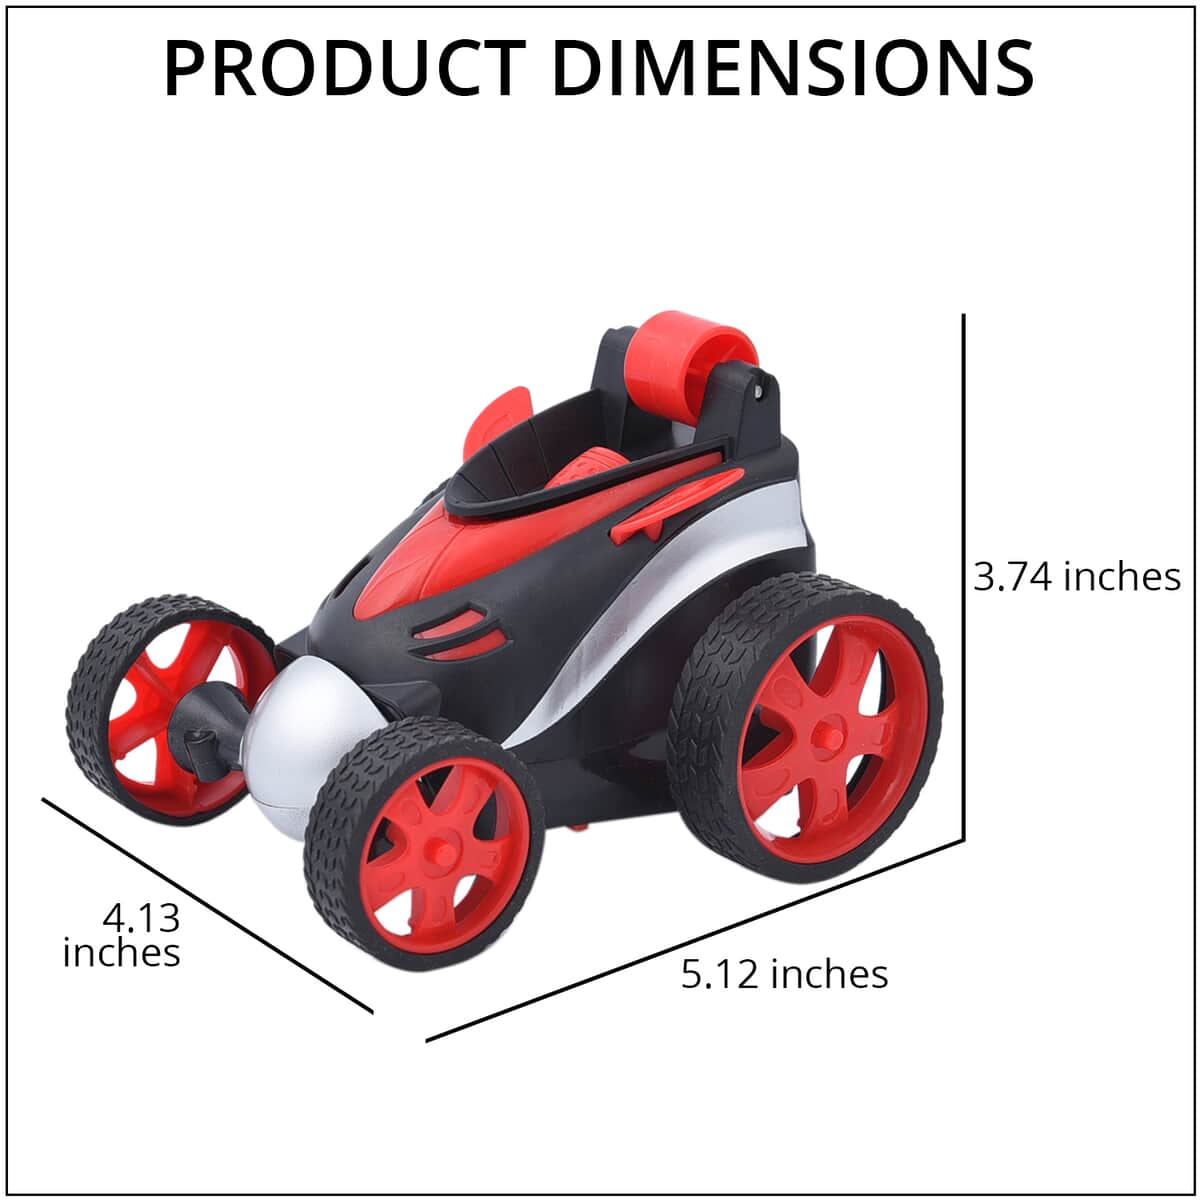 DOORBUSTER HOMESMART Red Racing Stunt Car (5.12"x4.13"x3.74") with Remote Control (5xAA Batteries not Included) image number 3